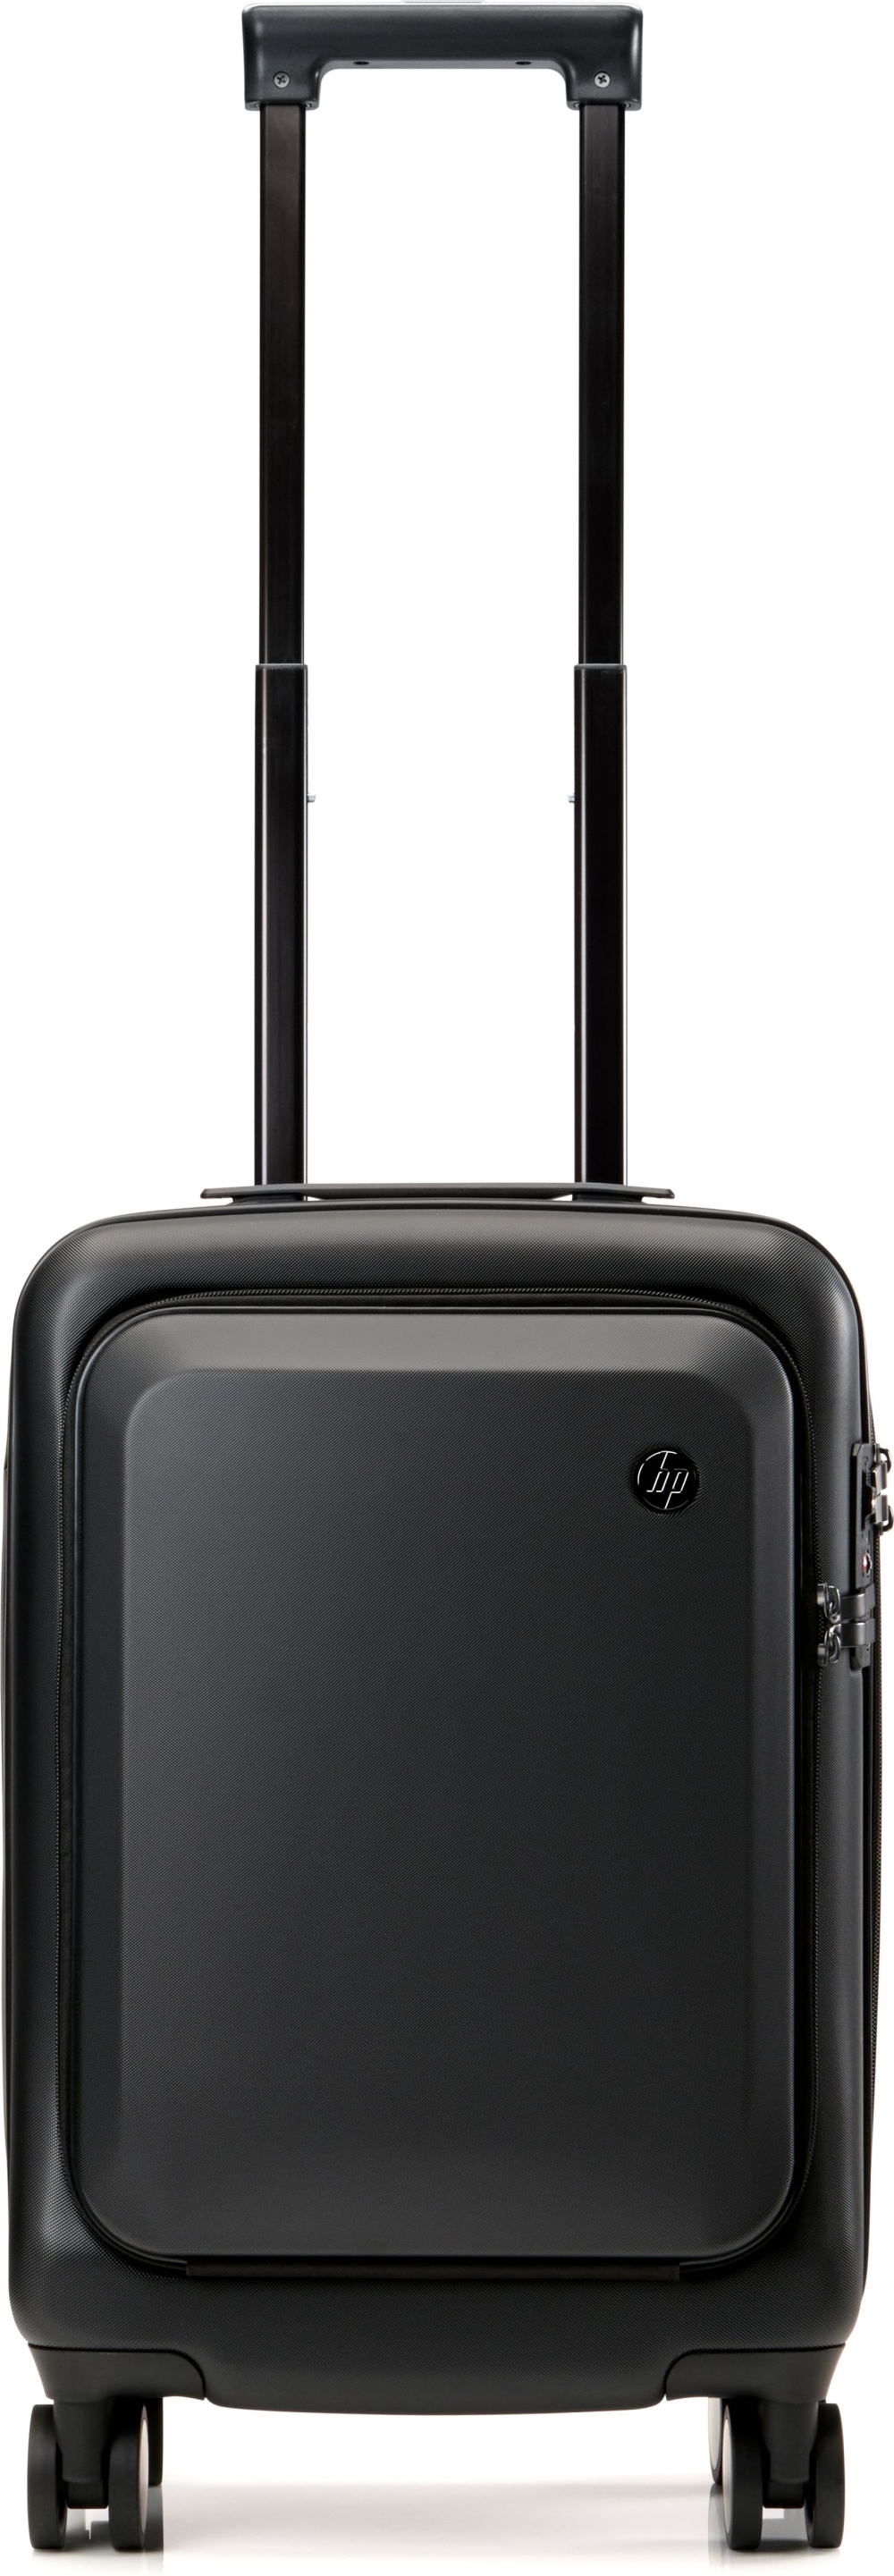 chanta-hp-all-in-one-carry-on-luggage-hp-7ze80aa